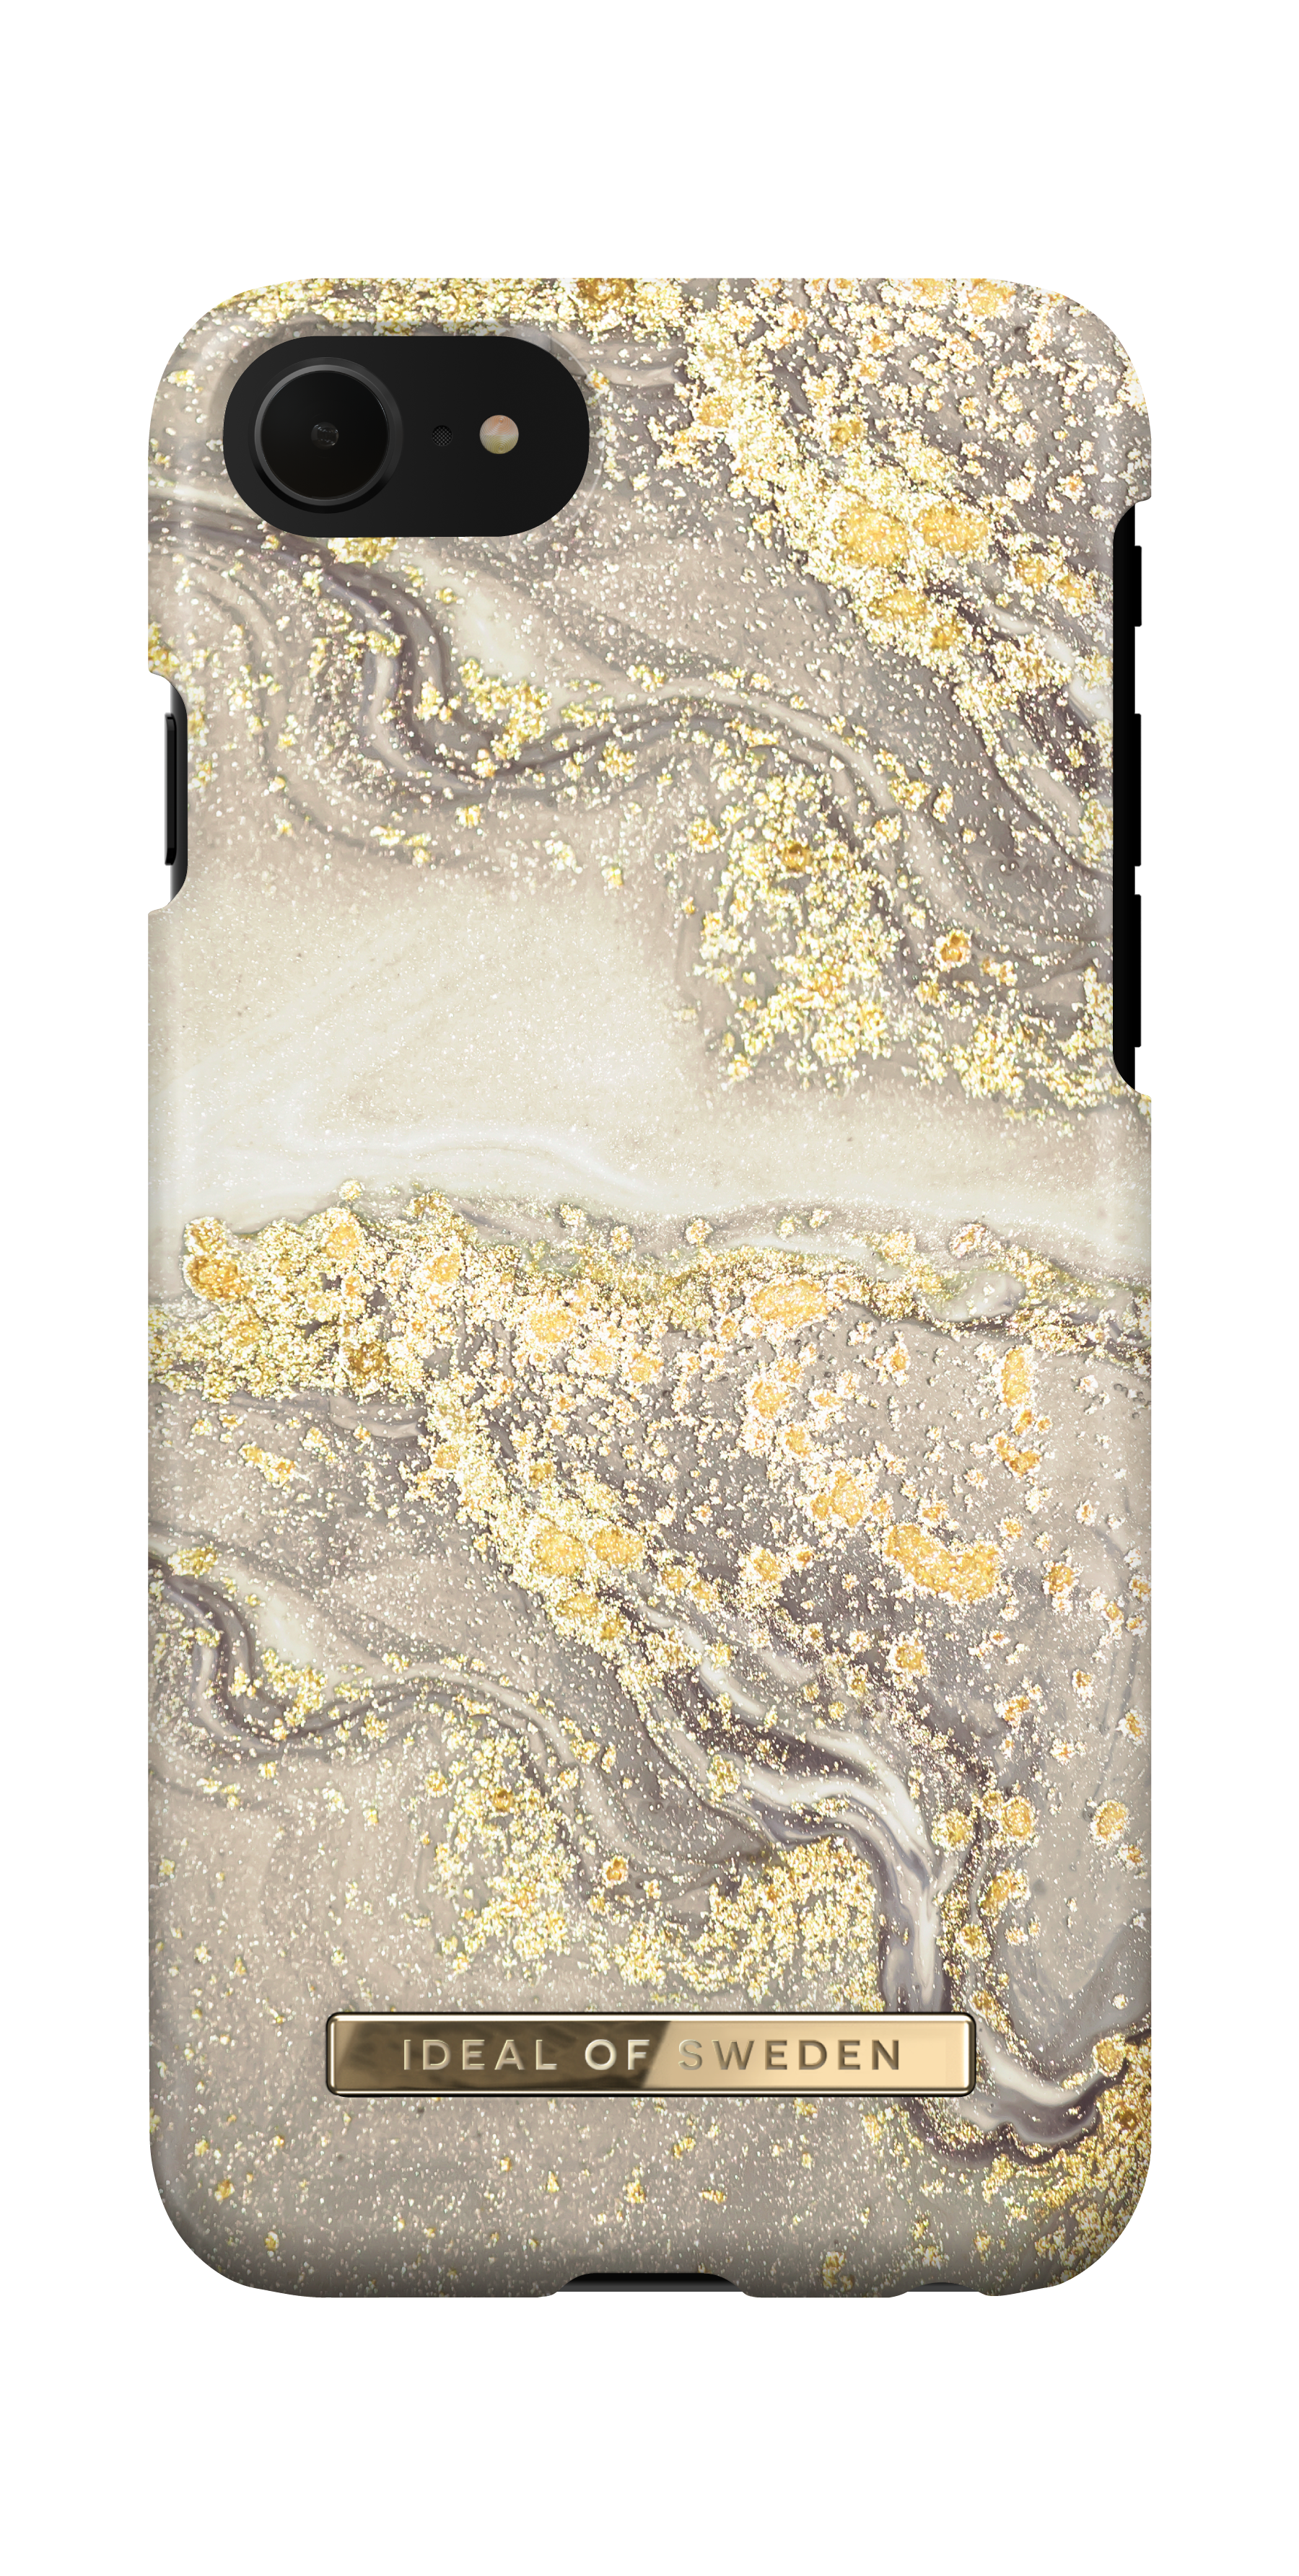 Marble Sparkle SWEDEN Greige Apple, SE (2020), 8, OF iPhone IDEAL iPhone iPhone iPhone 6(S), Backcover, IDFCSS19-I7-121, 7,